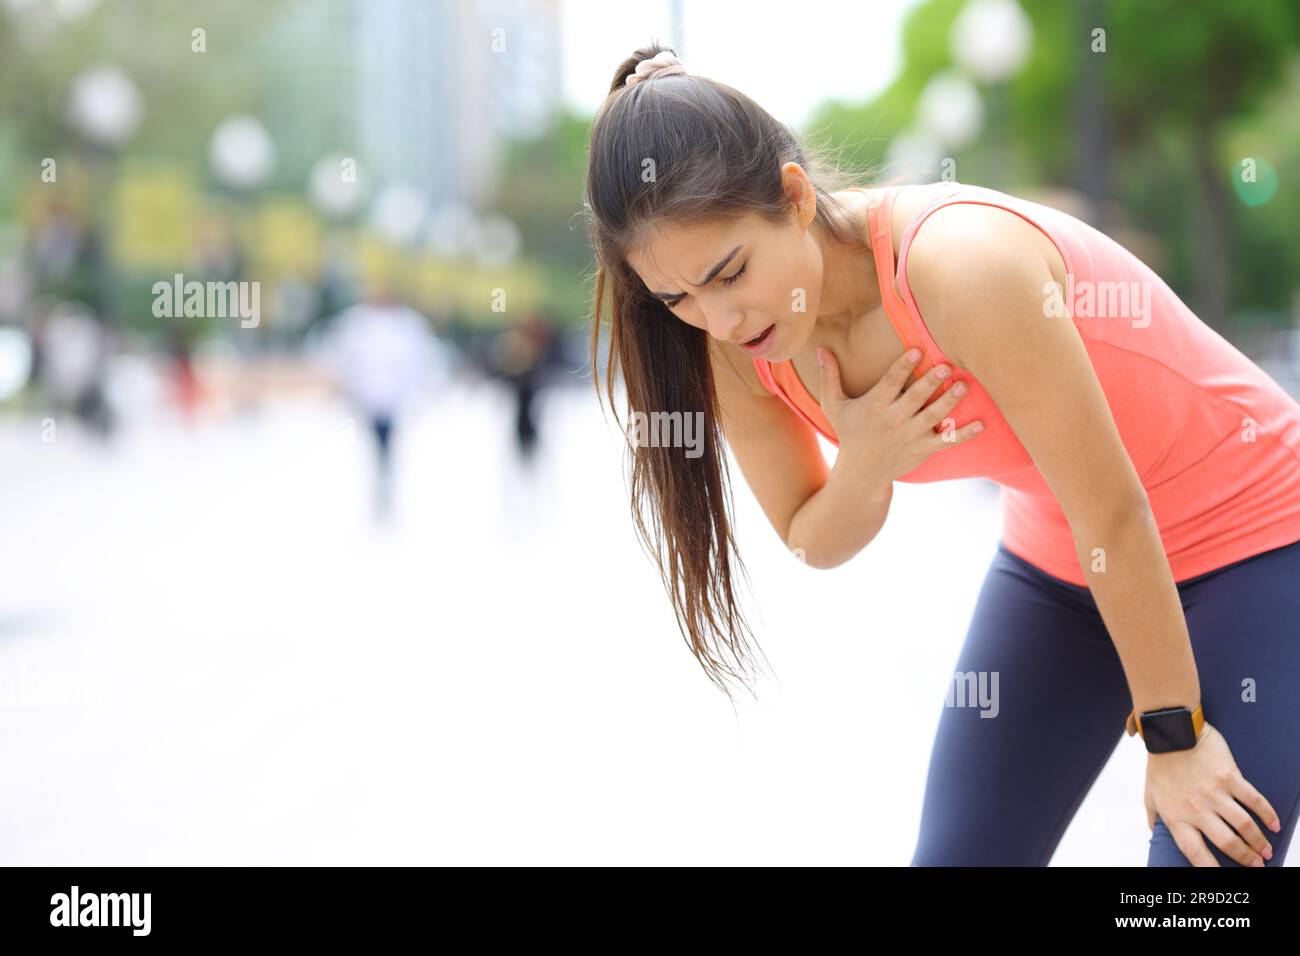 Exhausted runner touching chest breathing in the street Stock Photo